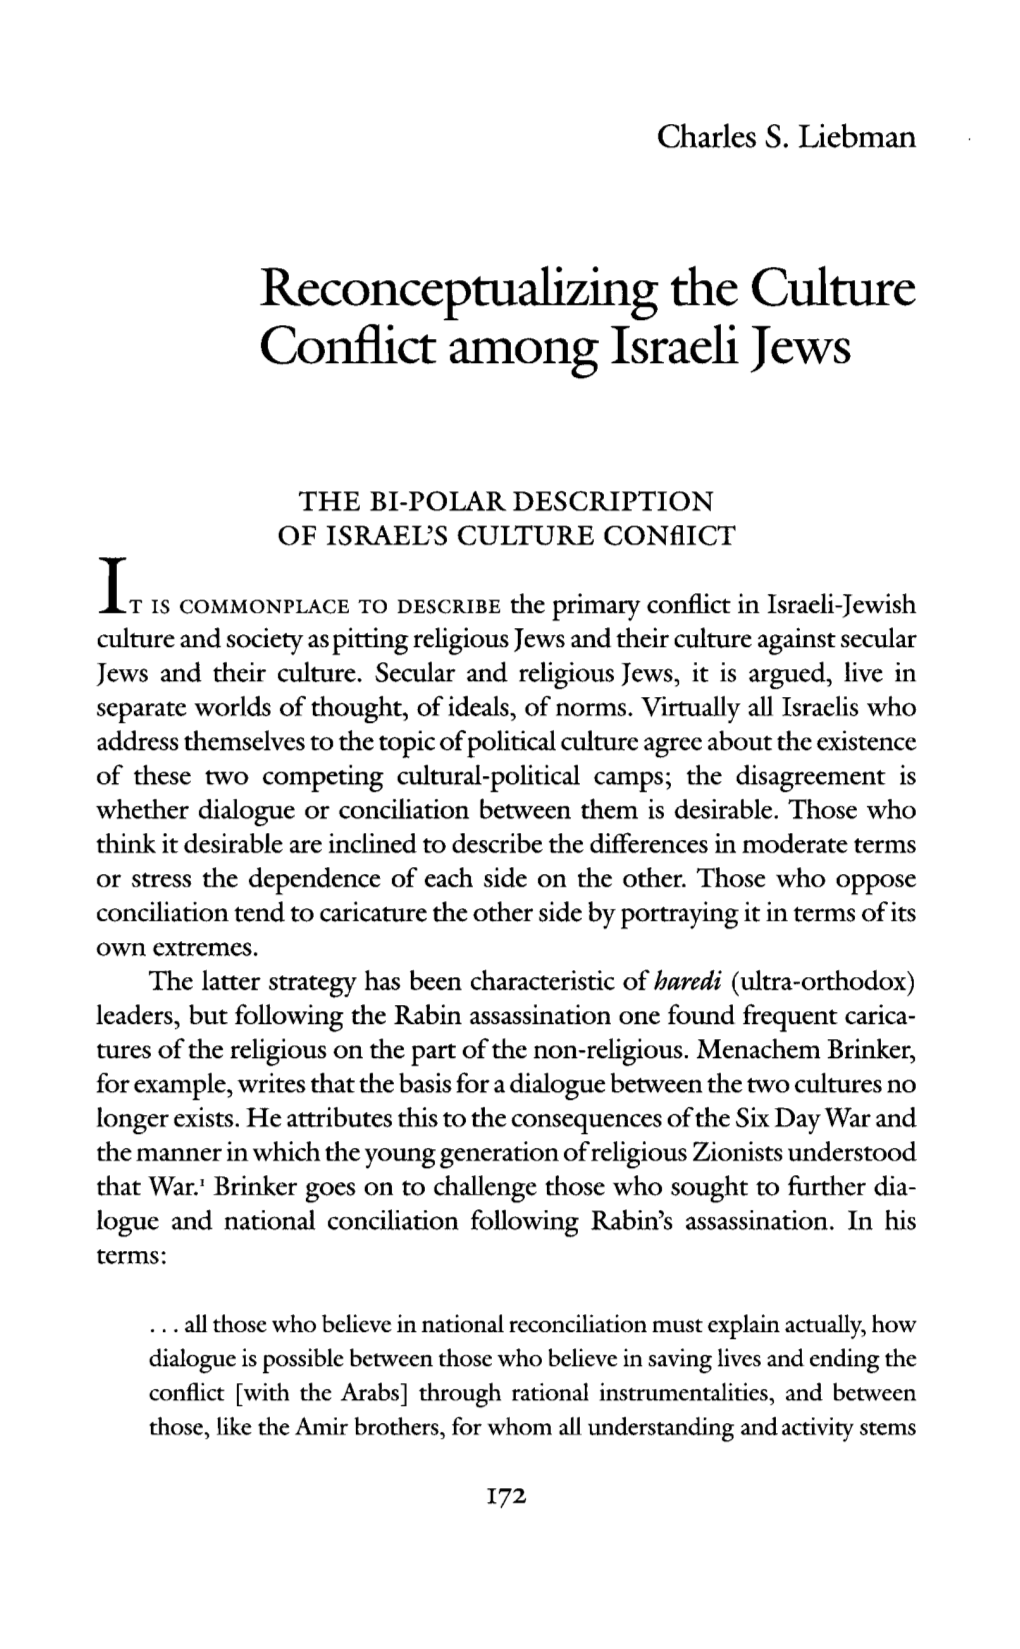 Reconceptualizing the Culture Conflict Among Israeli Jews